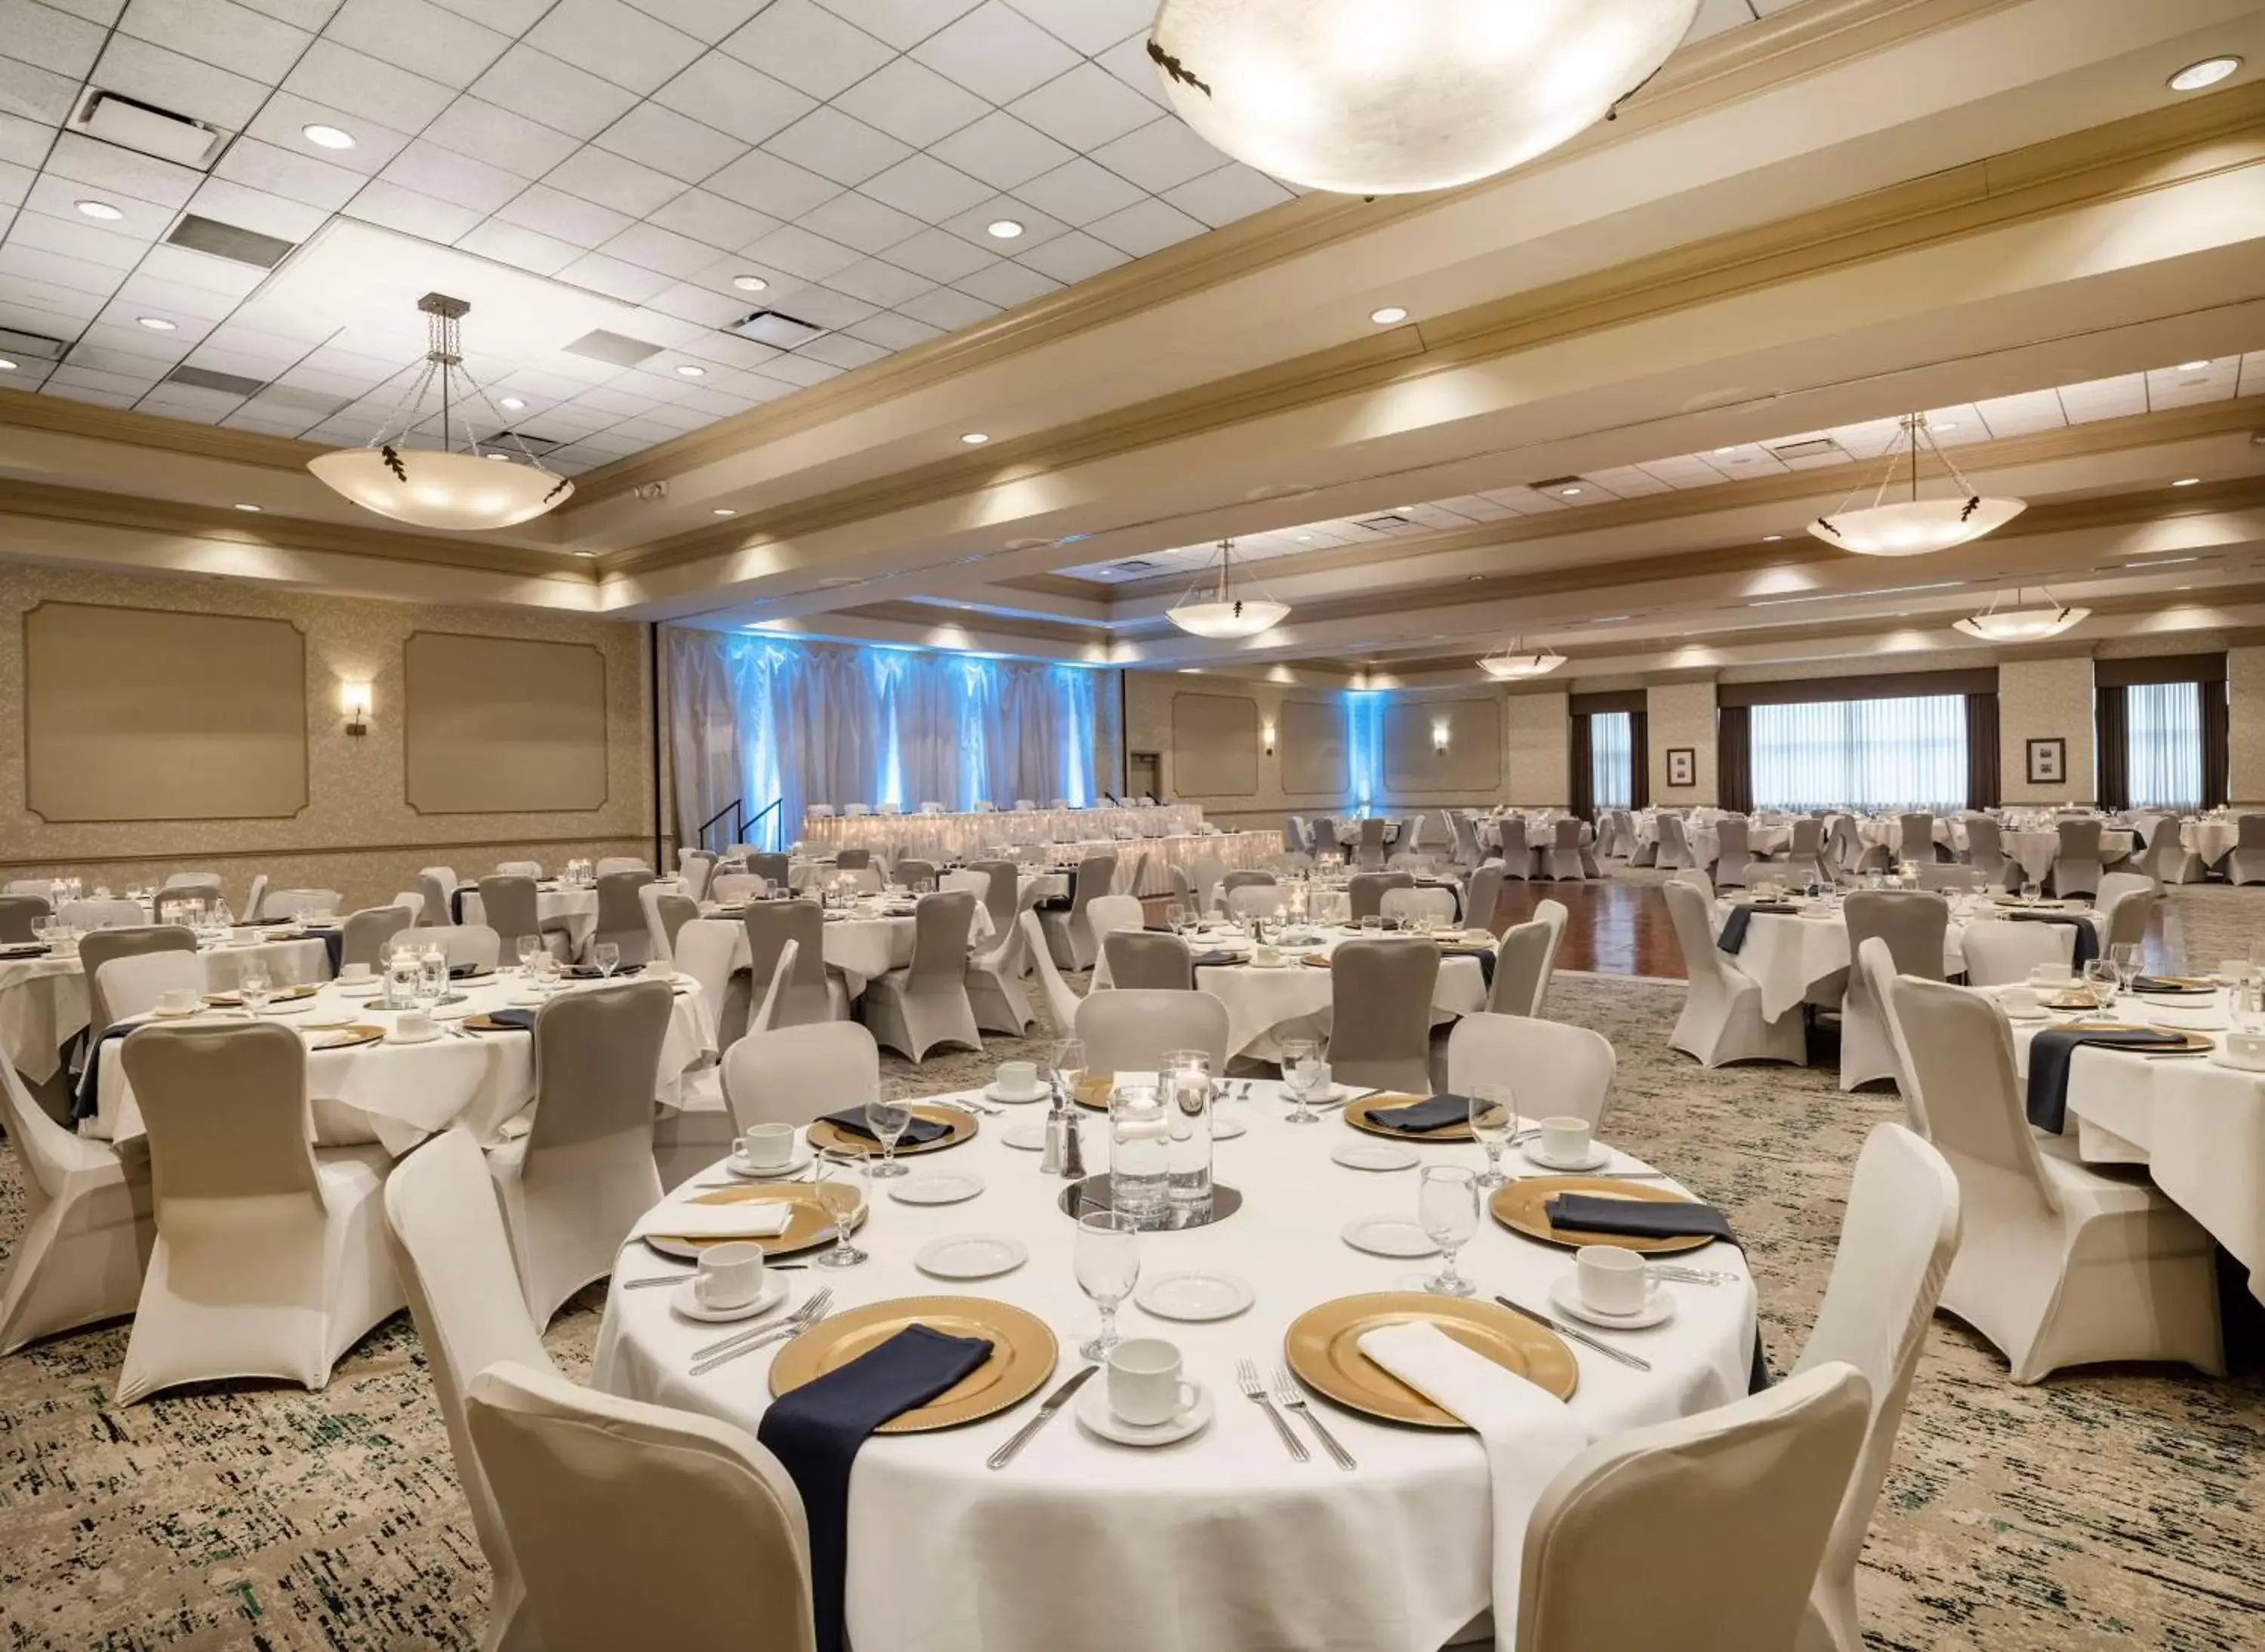 Meeting/conference room, Banquet Facilities in Hilton Garden Inn Cleveland/Twinsburg